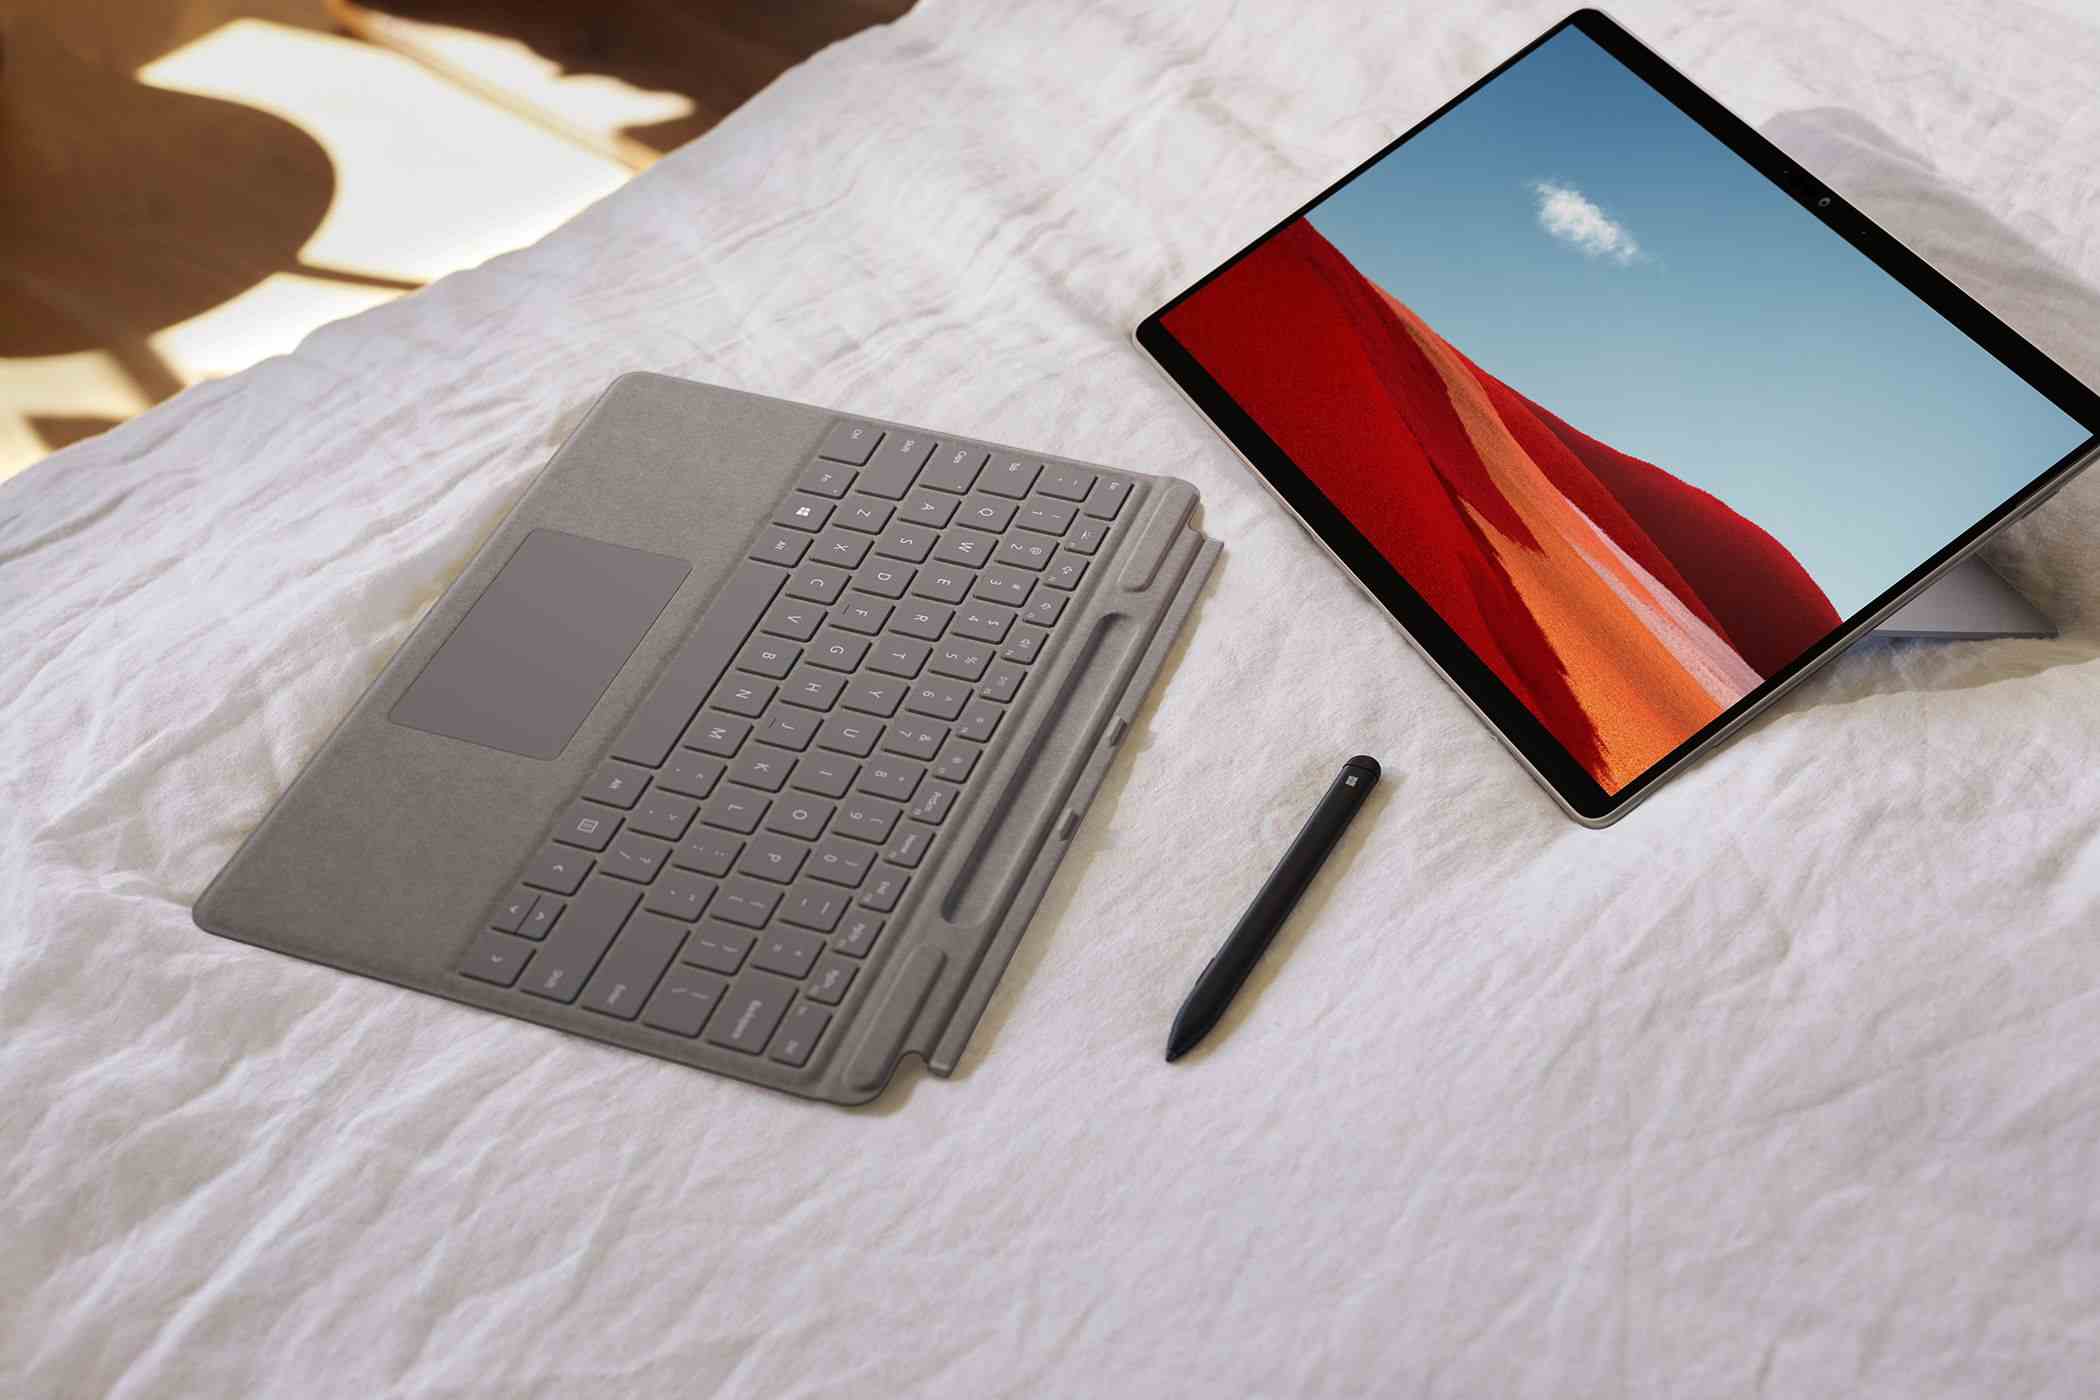 Thiết kế 2 trong 1 của Surface Pro